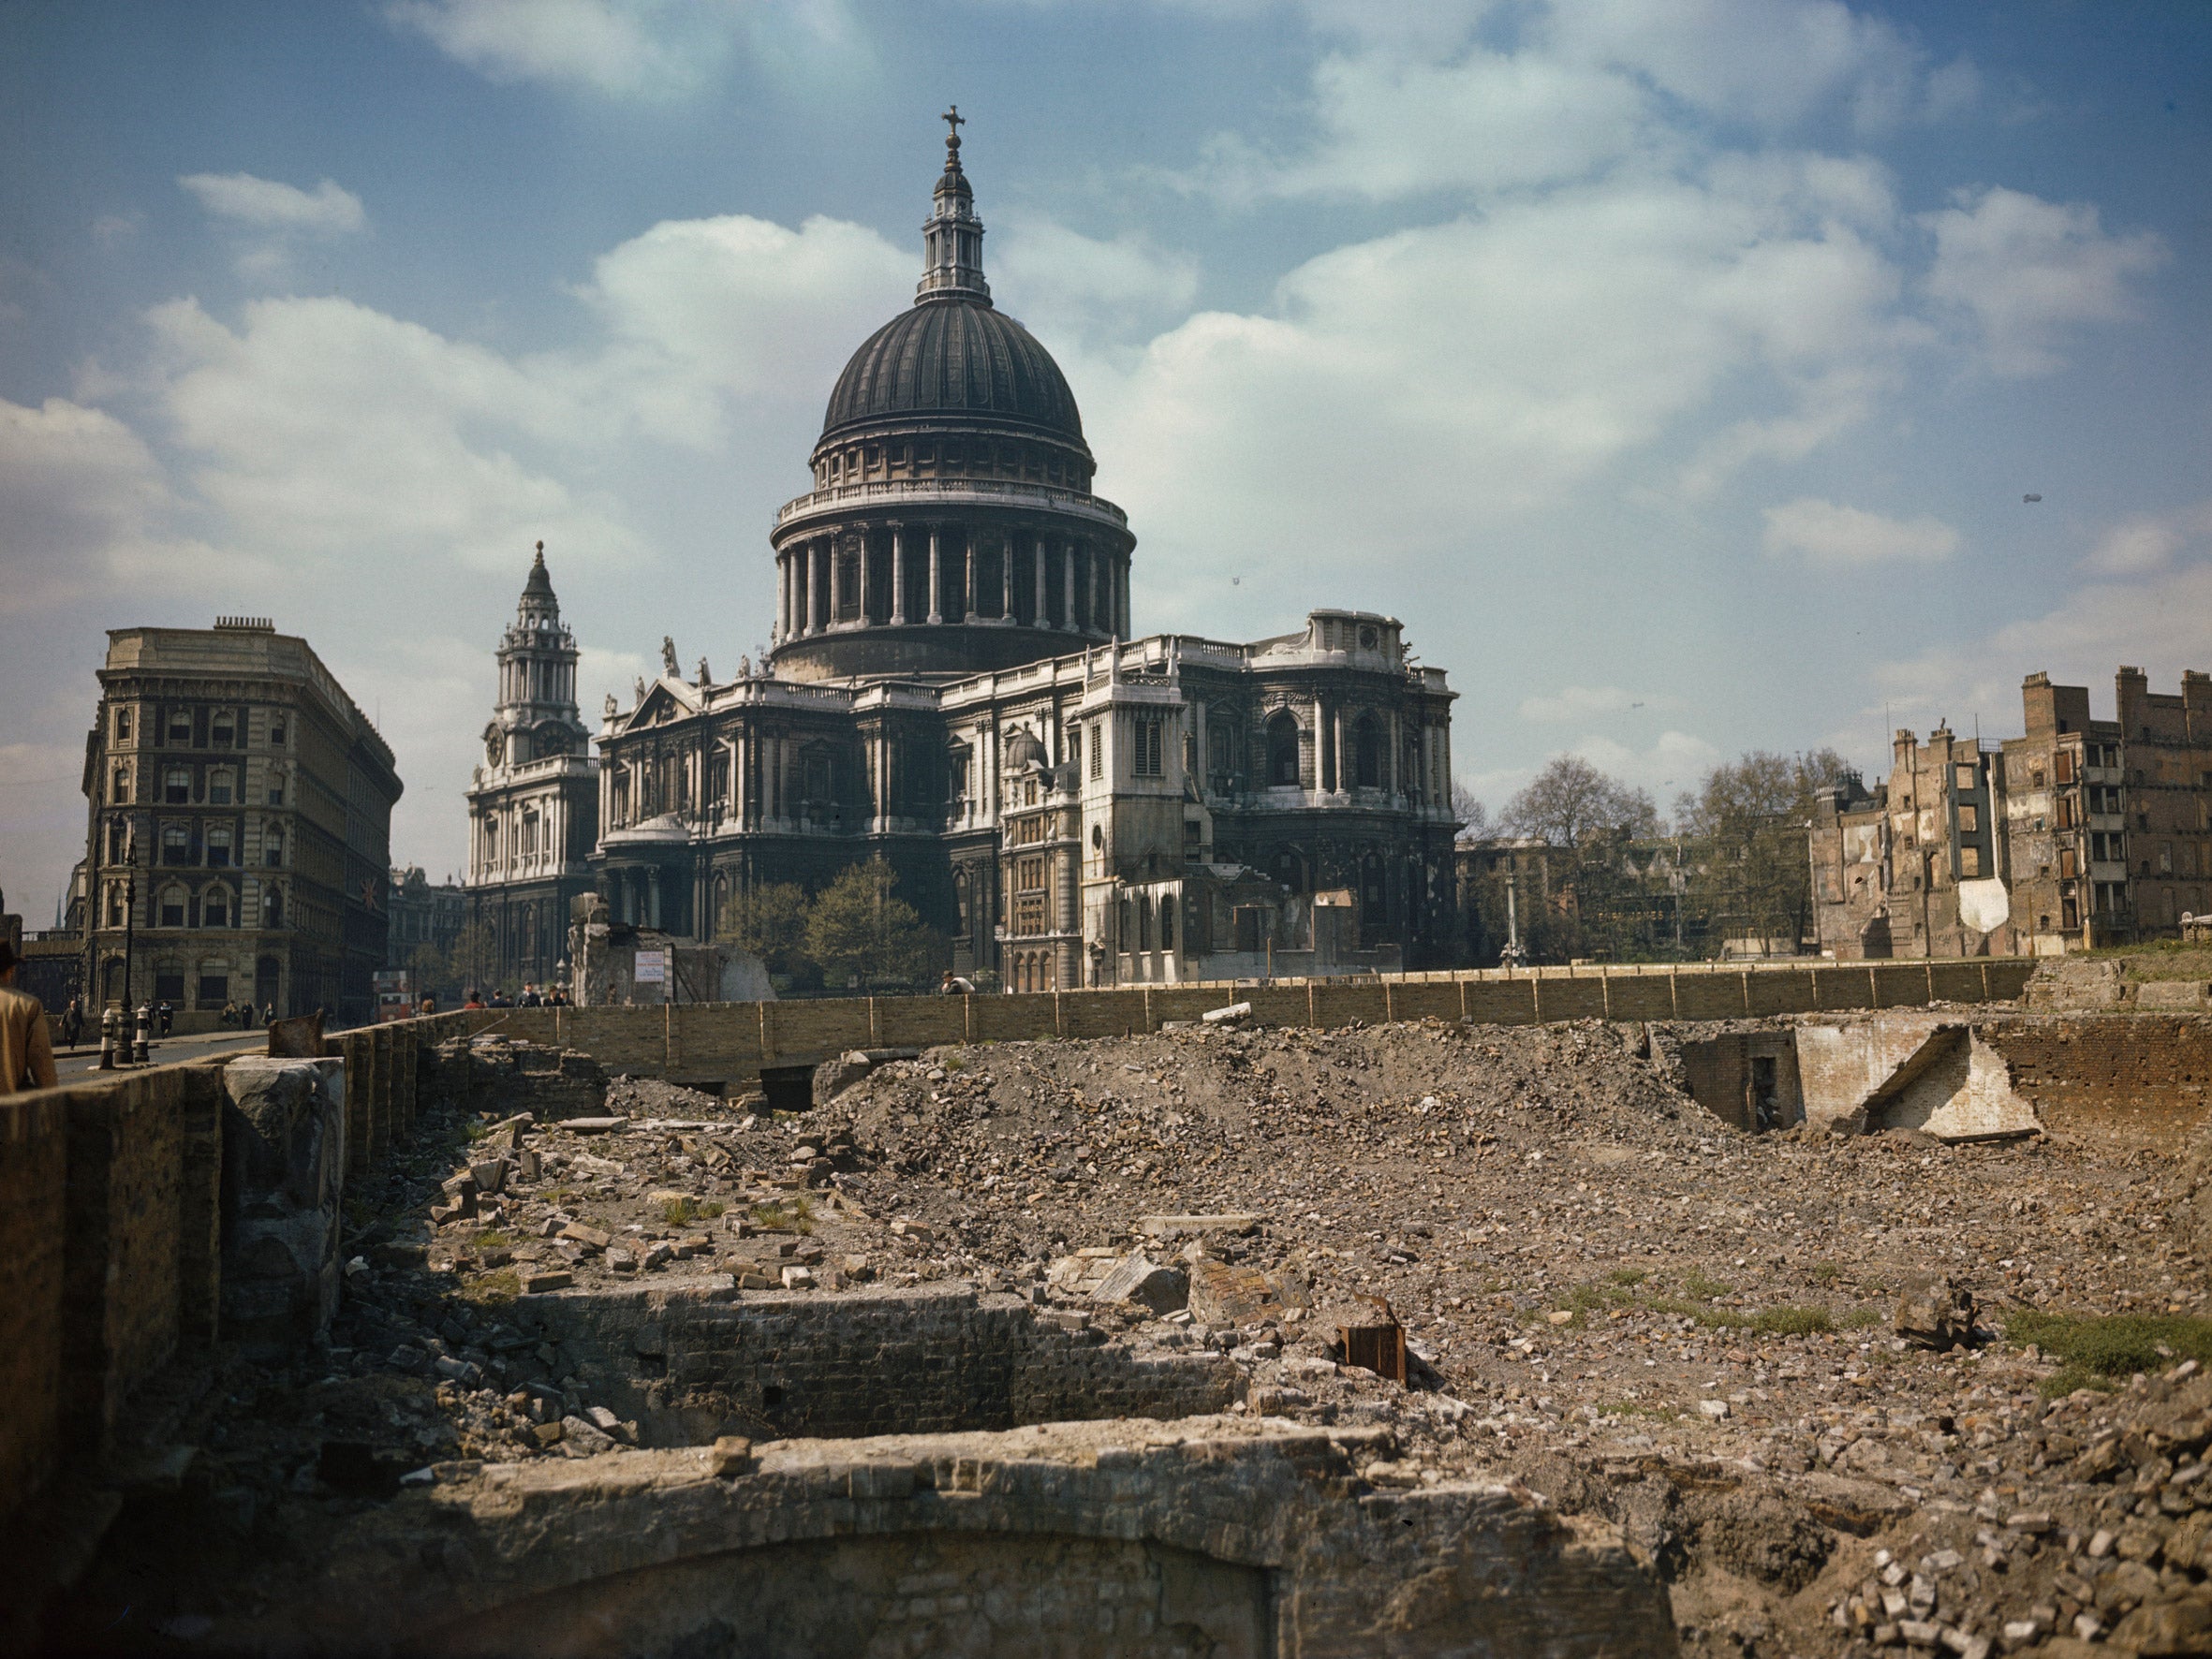 View of St Paul's Cathedral and the bomb damaged areas surrounding it in London